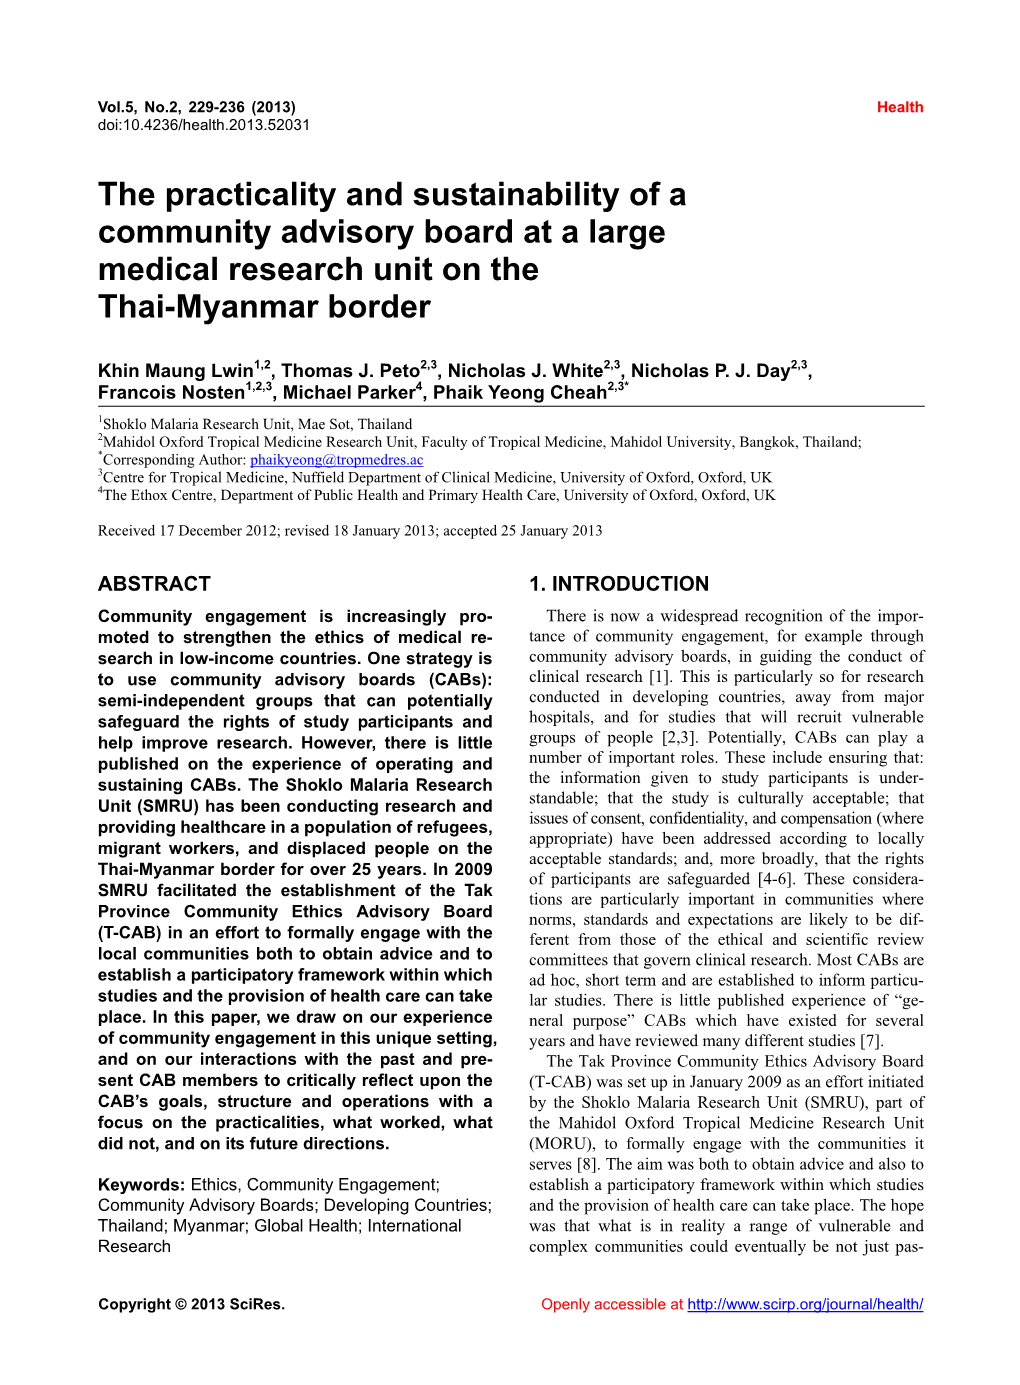 The Practicality and Sustainability of a Community Advisory Board at a Large Medical Research Unit on the Thai-Myanmar Border